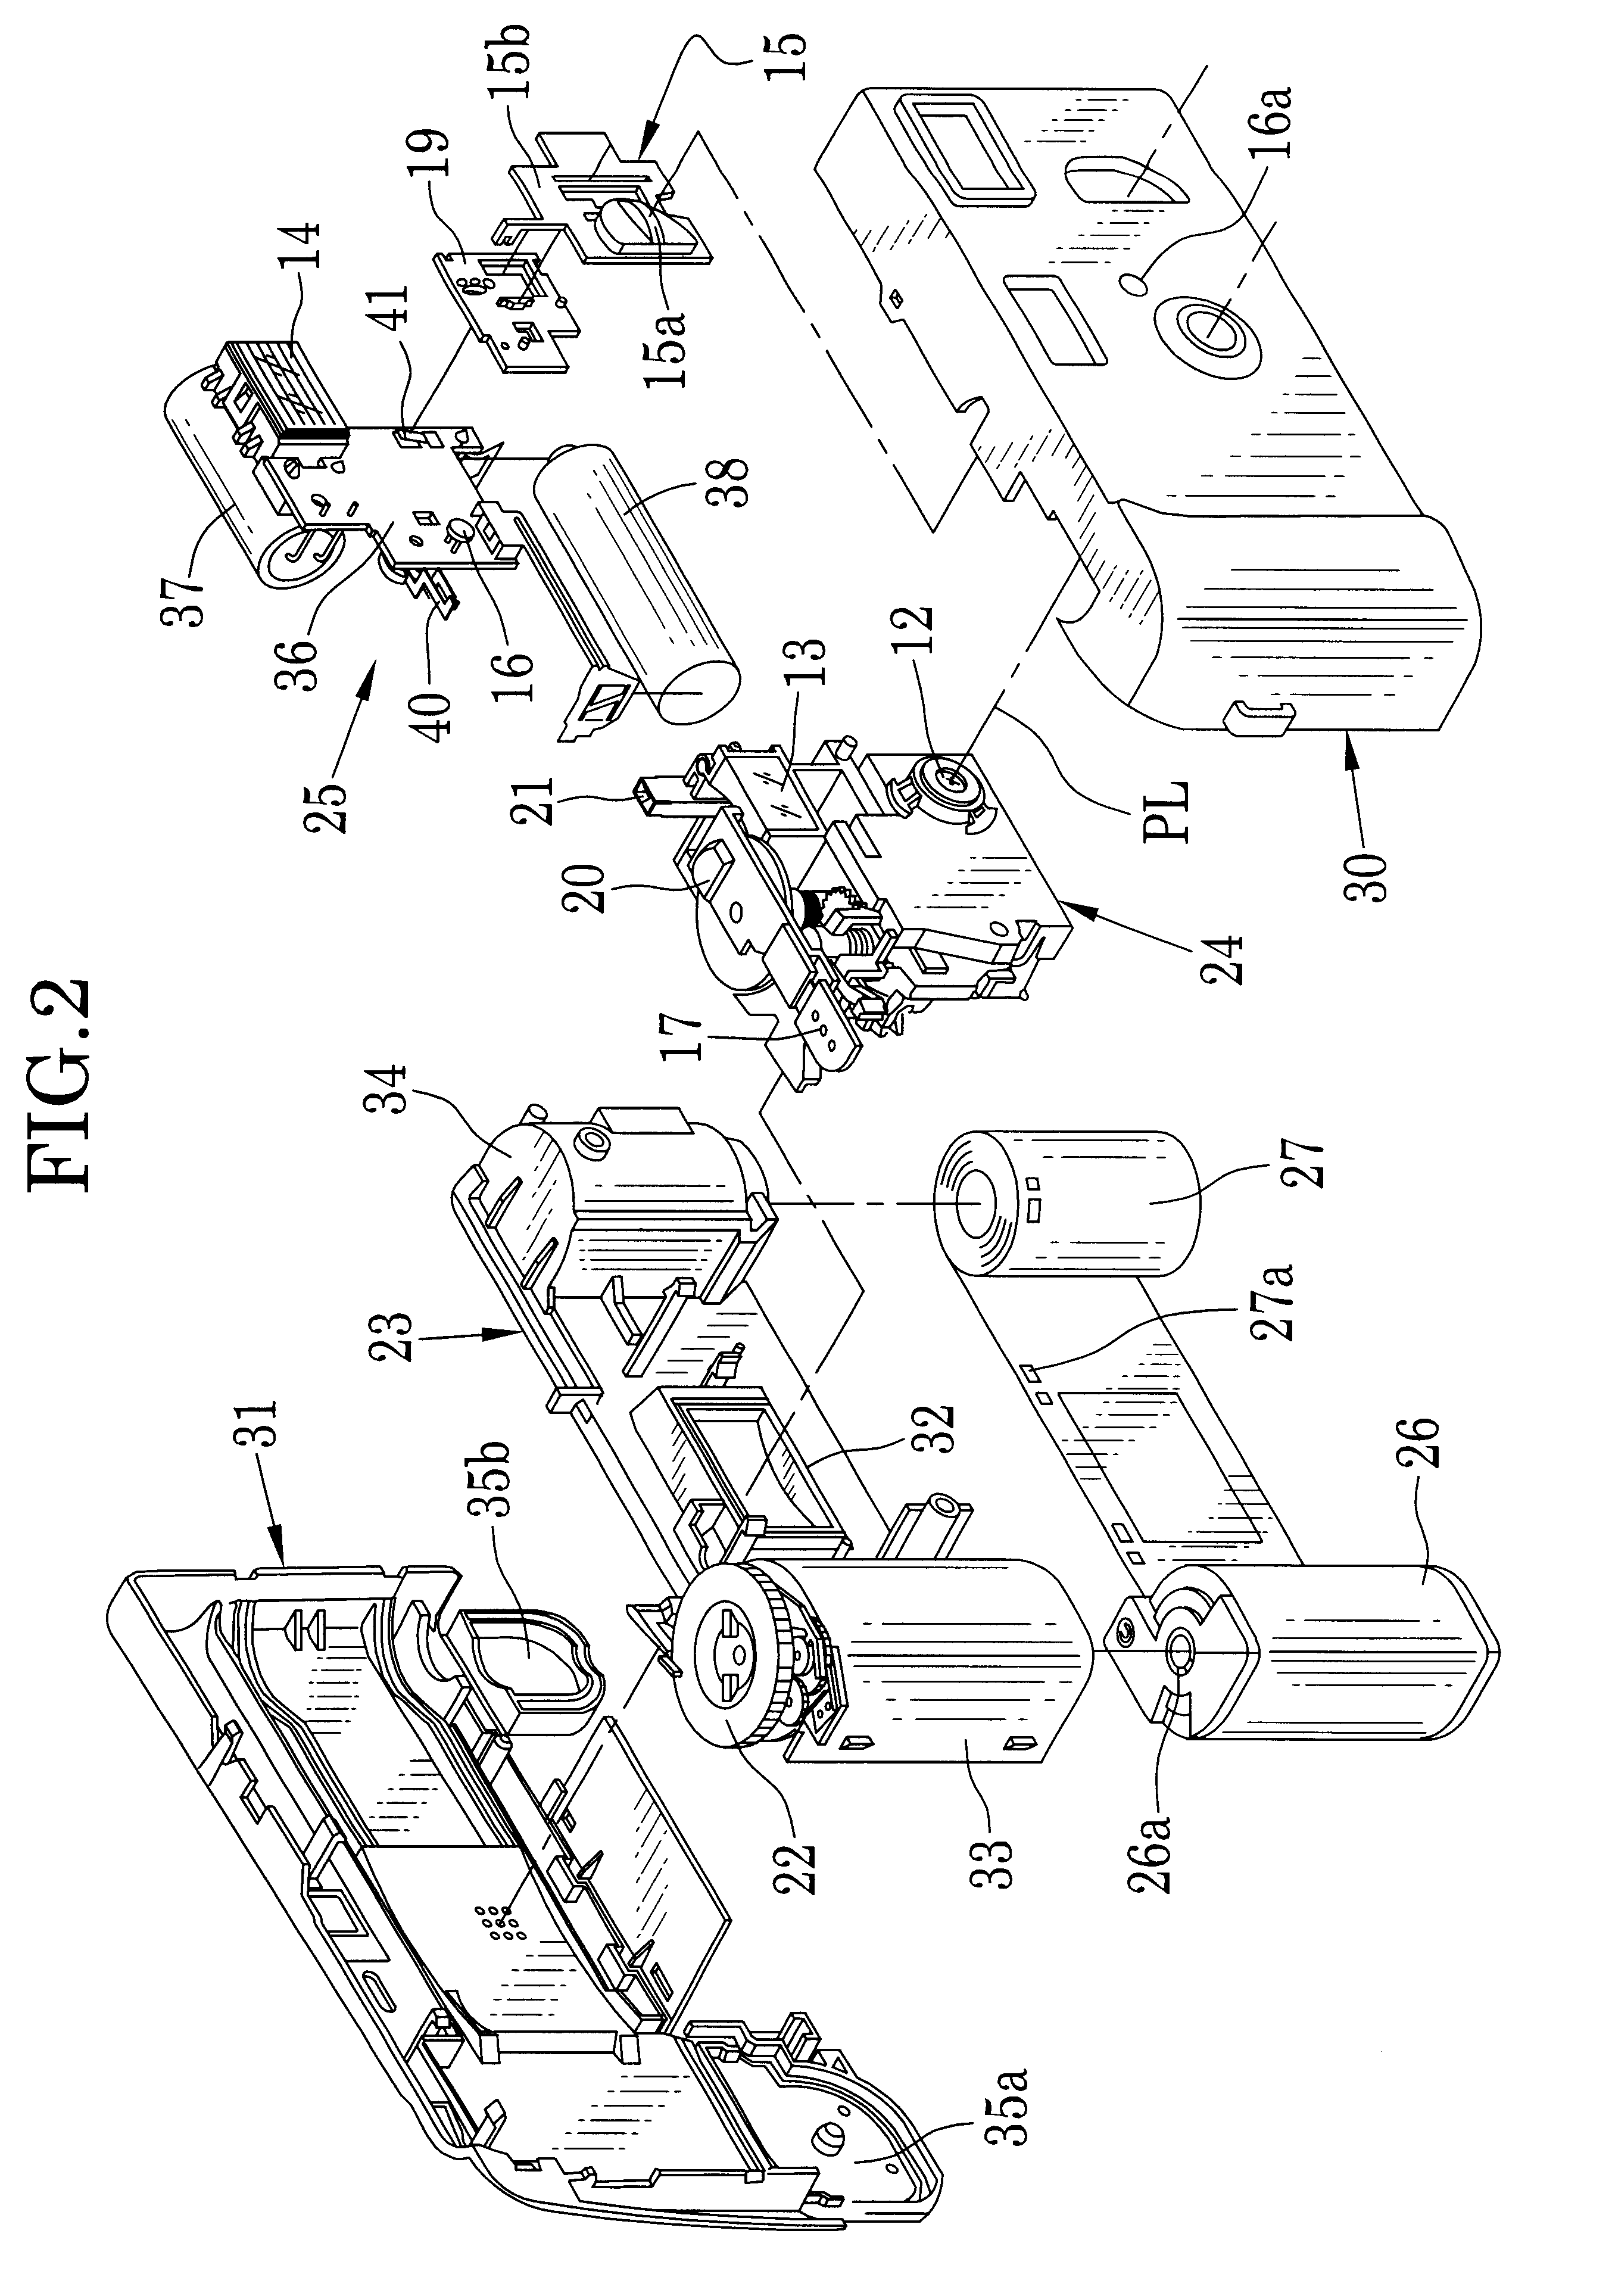 Automatic exposure control device for a camera